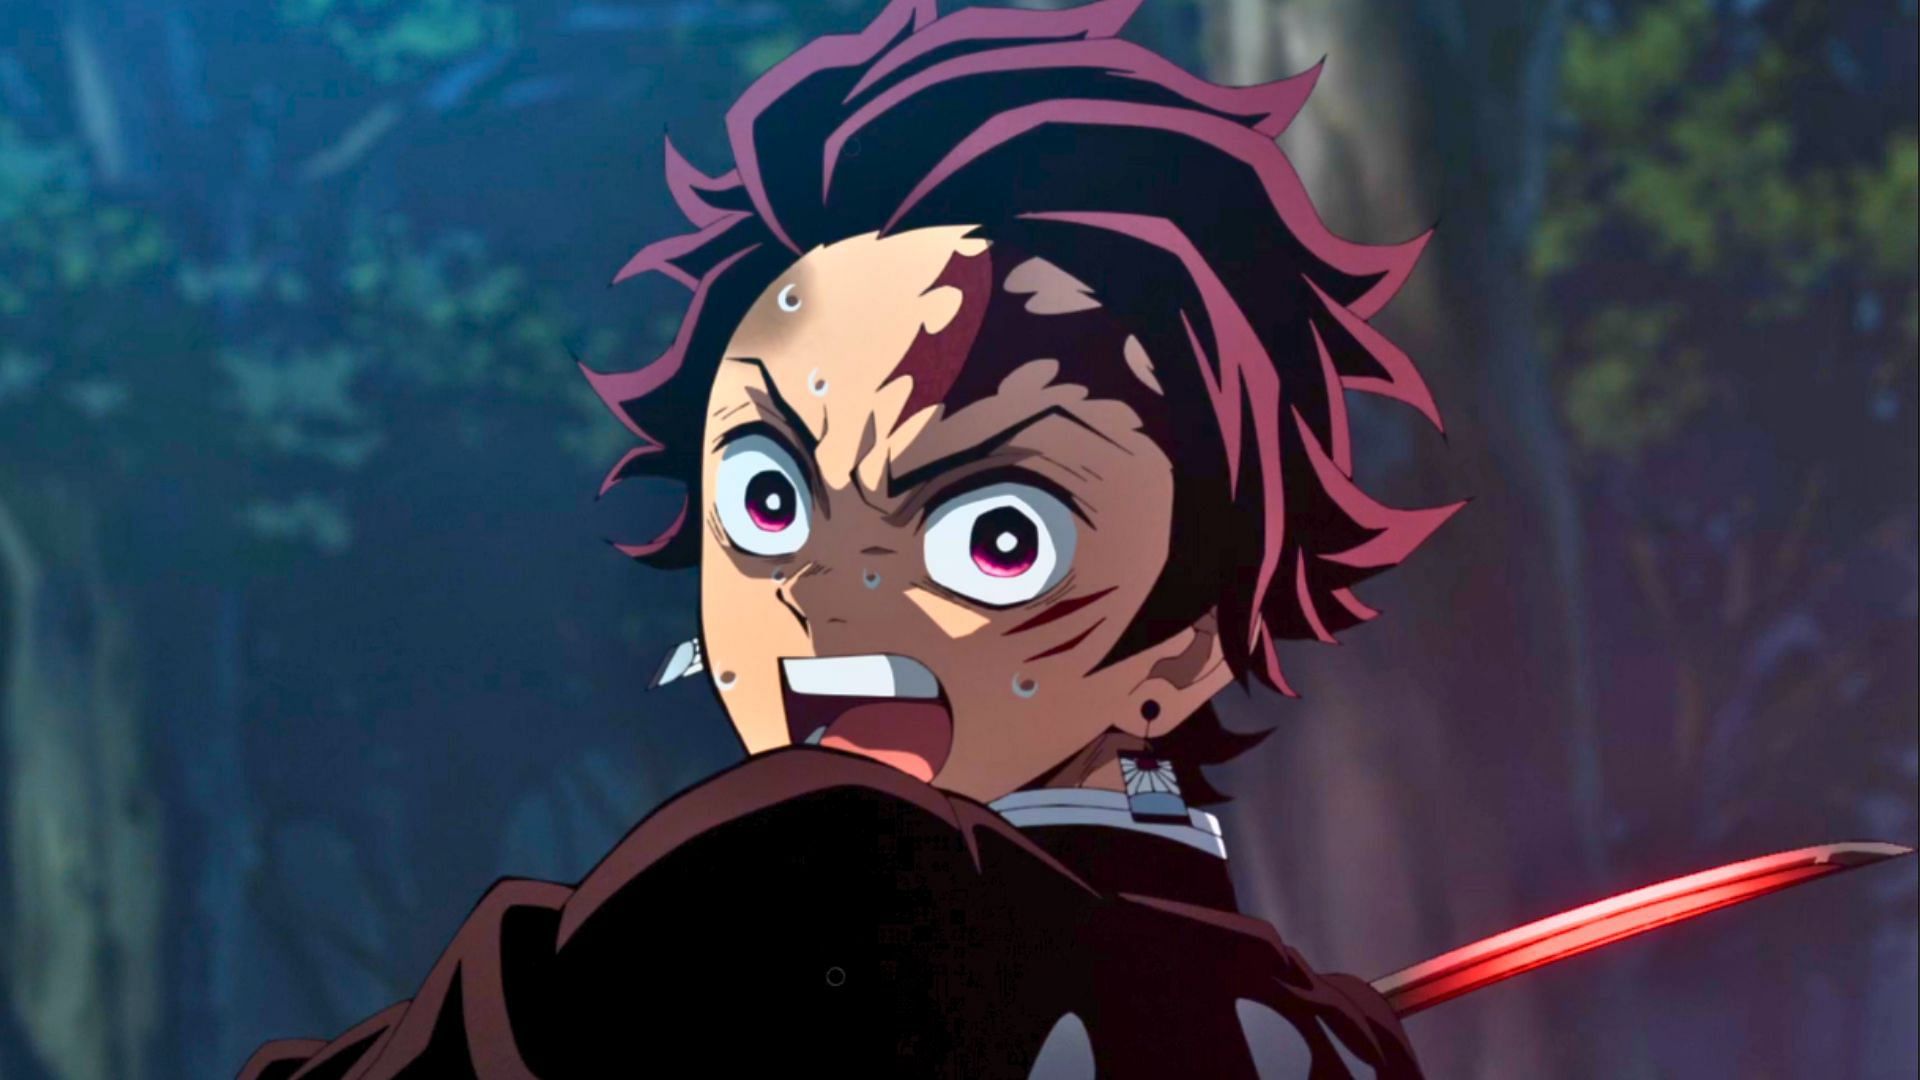 Demon Slayer season 3 episode 7 leak gives a first look at